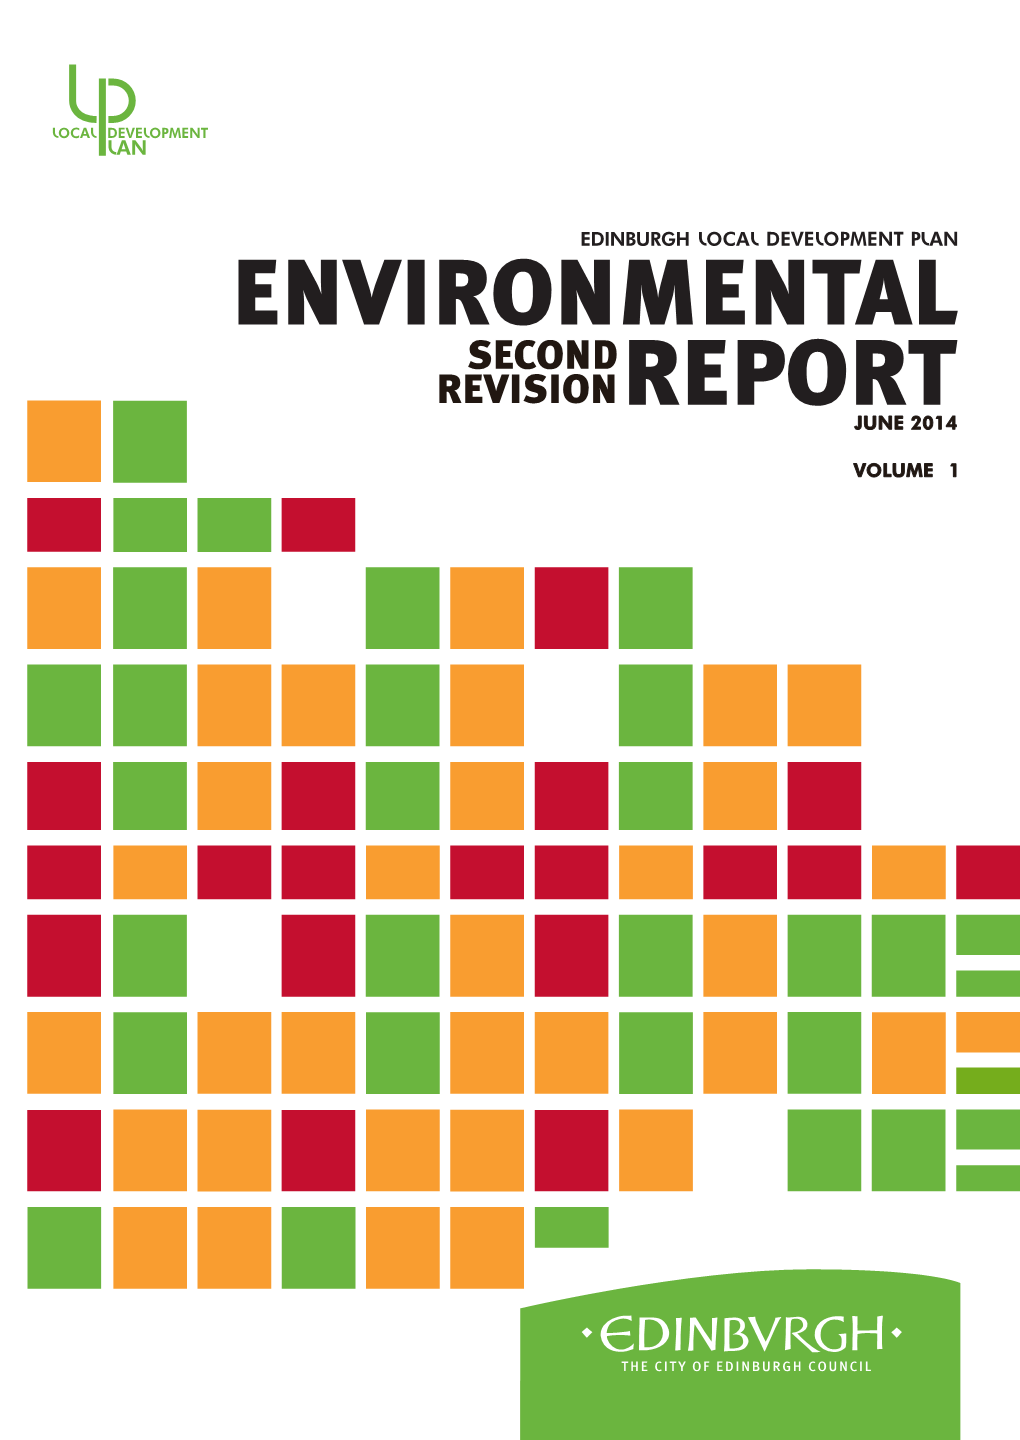 Environmental Report Assesses the Impact of the Plan and Explains the Selection of New Housing Sites